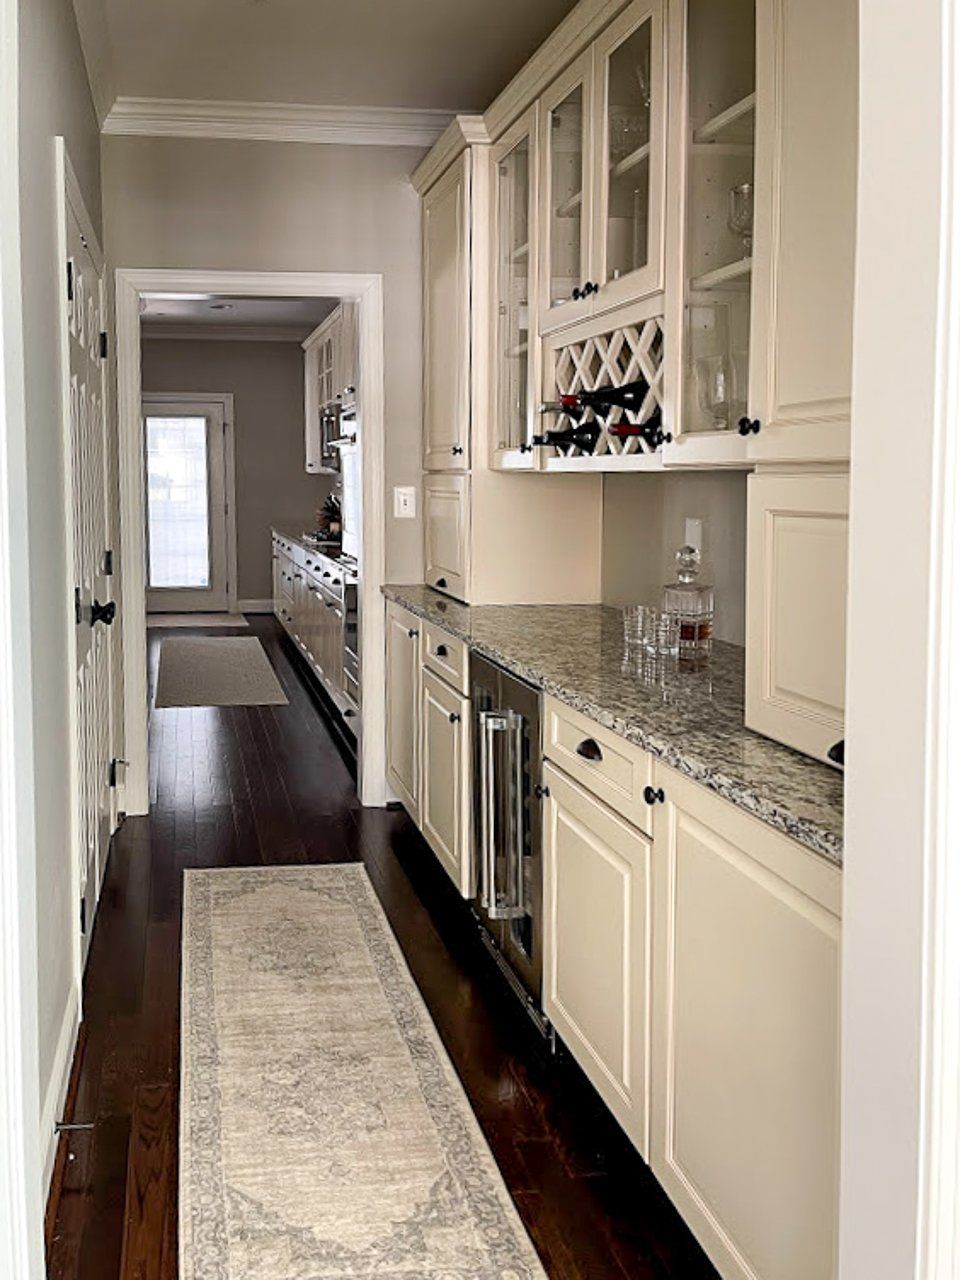 Kitchen with white cabinetry | East Port Classic | Covell Communities | Chester, Maryland 21619